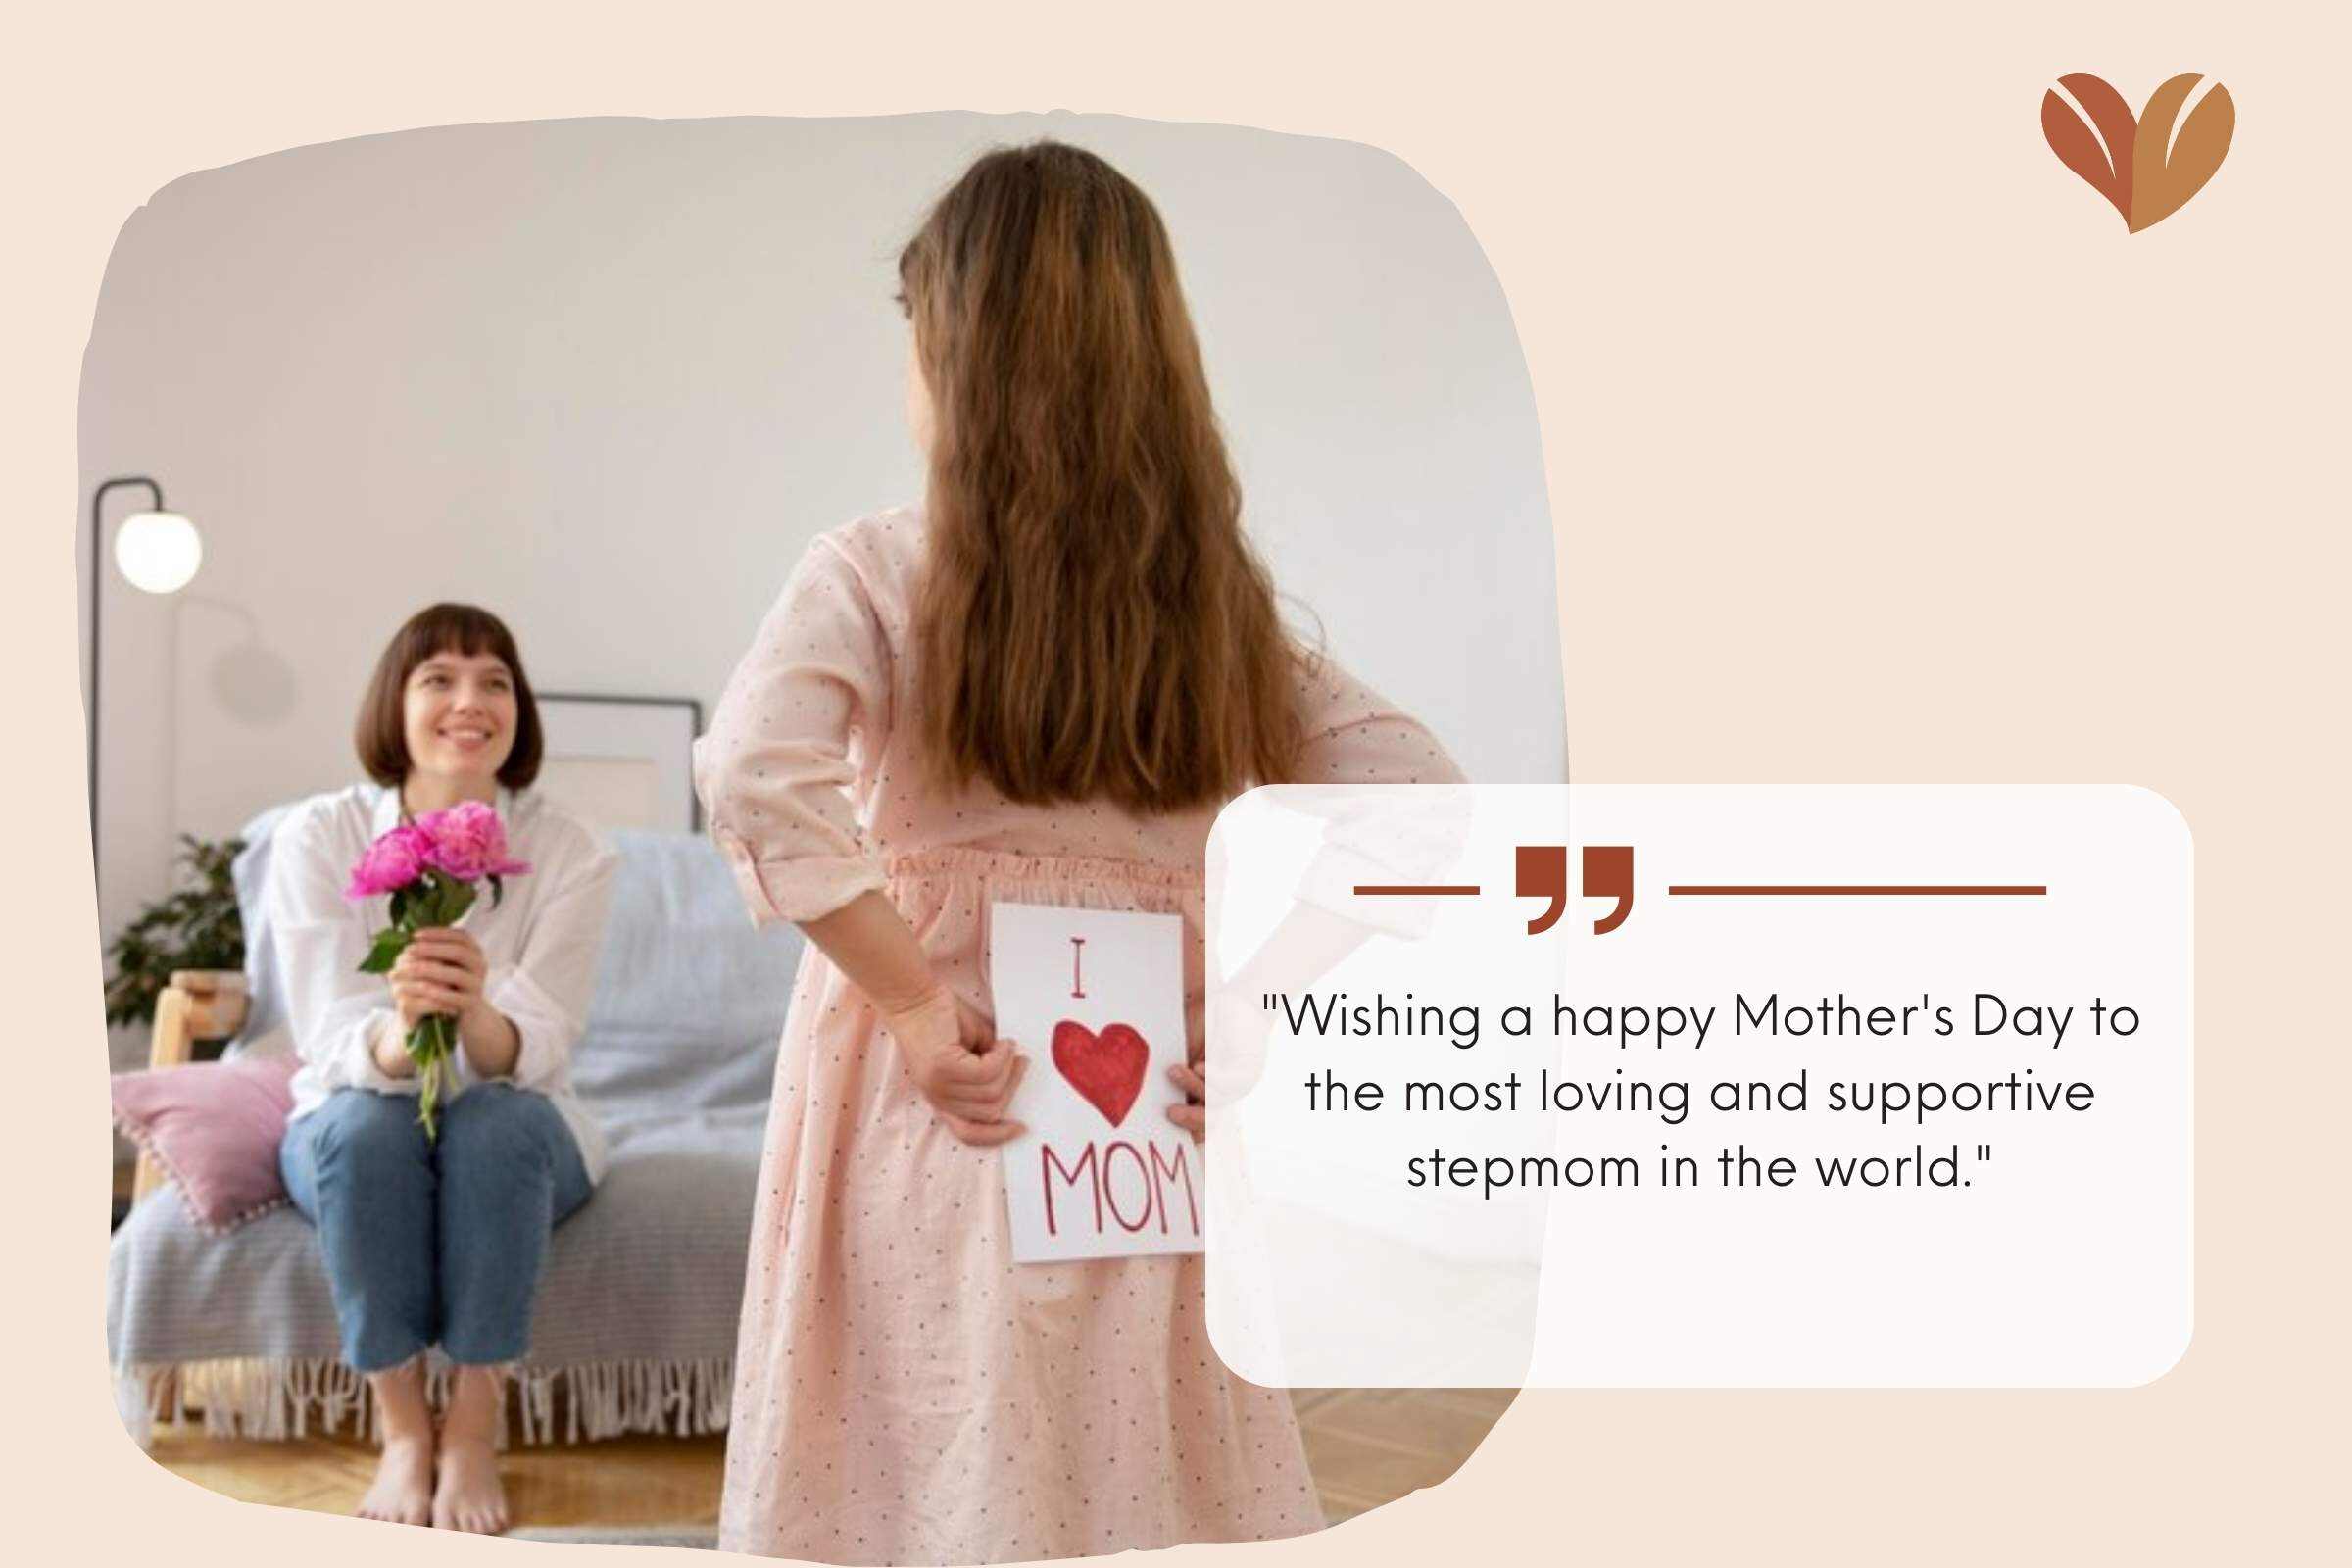  What to write in card for Mother's Day messages for Stepmom